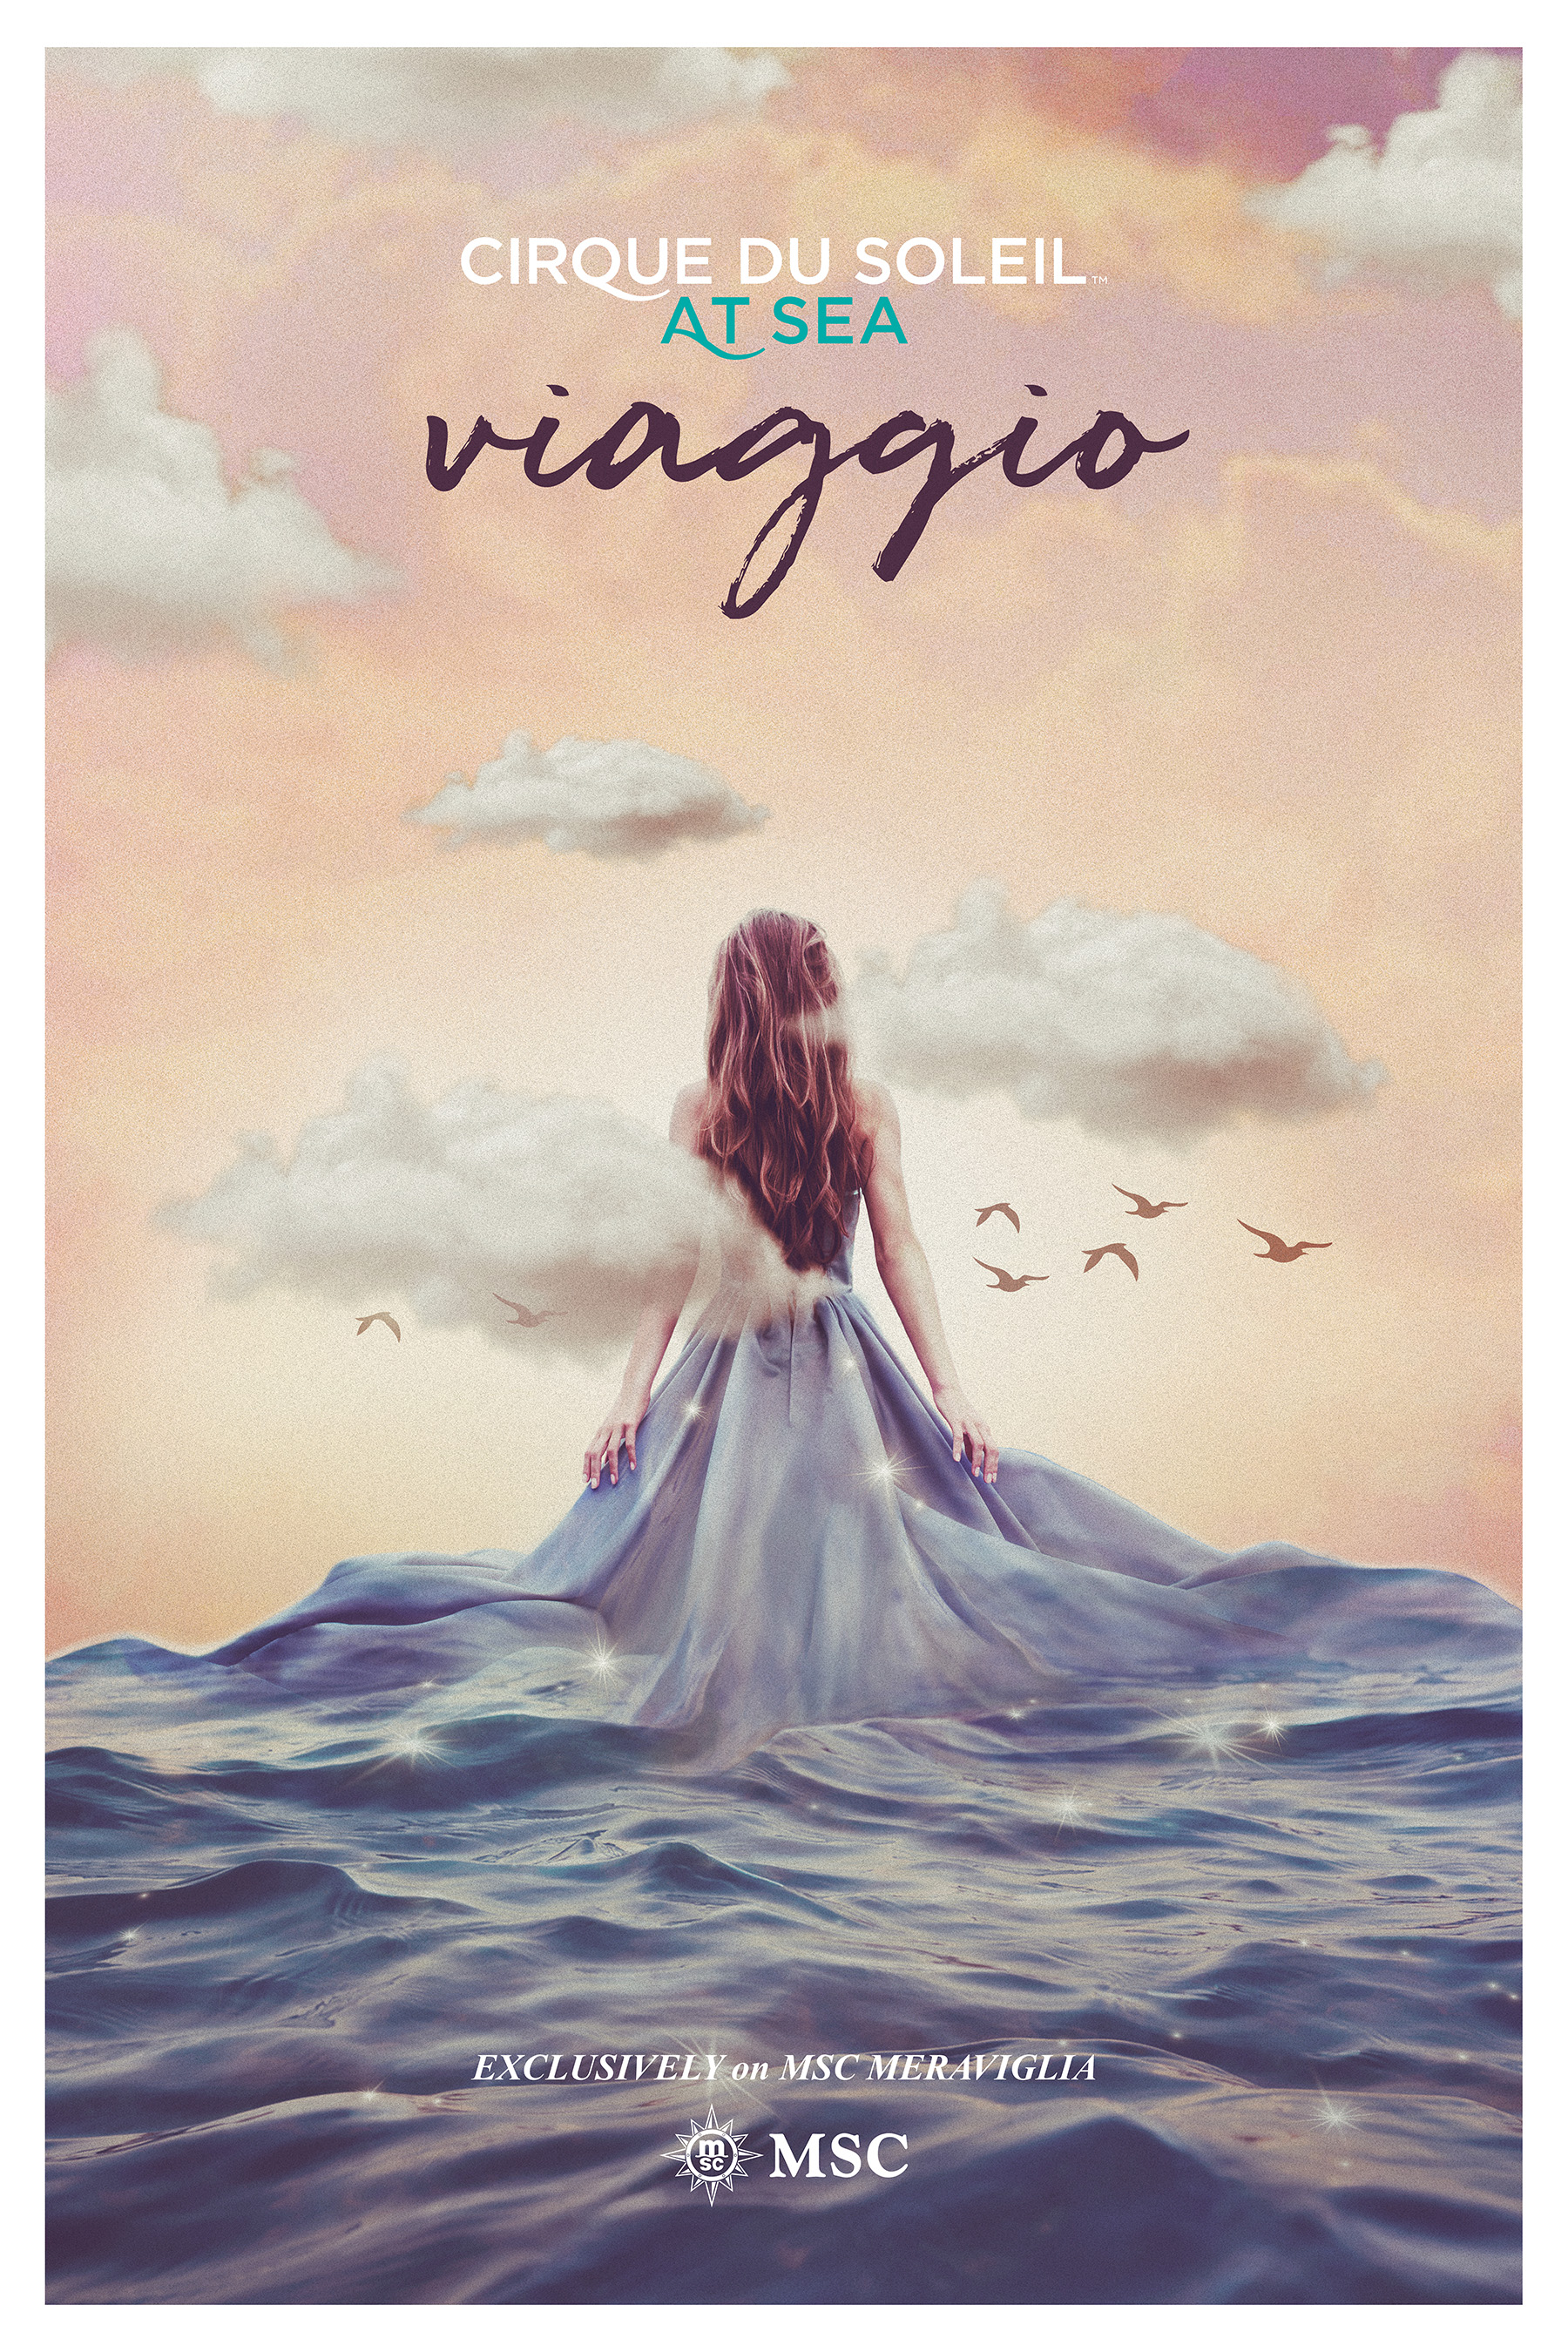 VIAGGIO presents the story of a passionate and eccentric artist who hears the call of his Faceless Muse who beckons the painter to a vivid world of his unbridled imagination to complete his masterpiece.